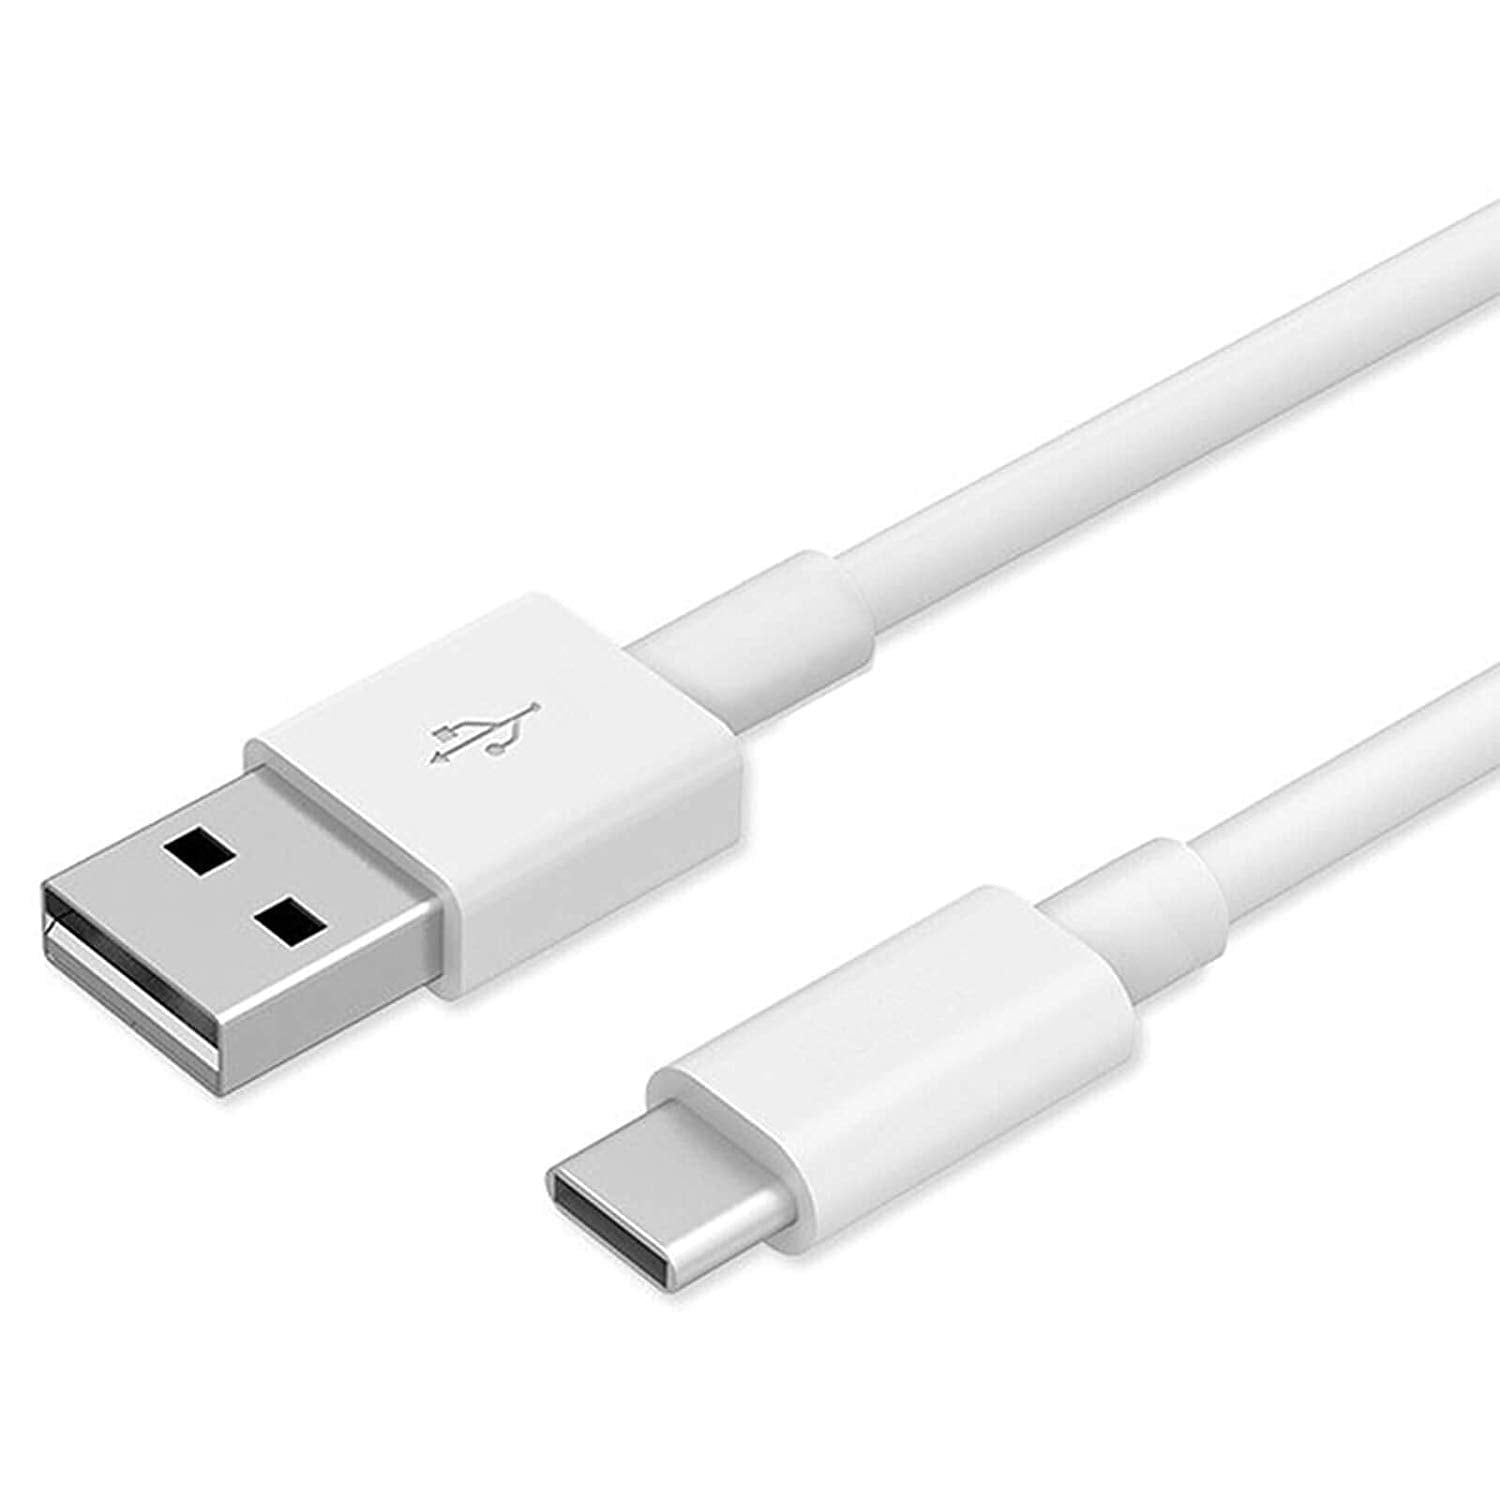 Samsung Galaxy A21s USB to Type C Charging Cable In Car White - 25 CM Short - SmartPhoneGadgetUK